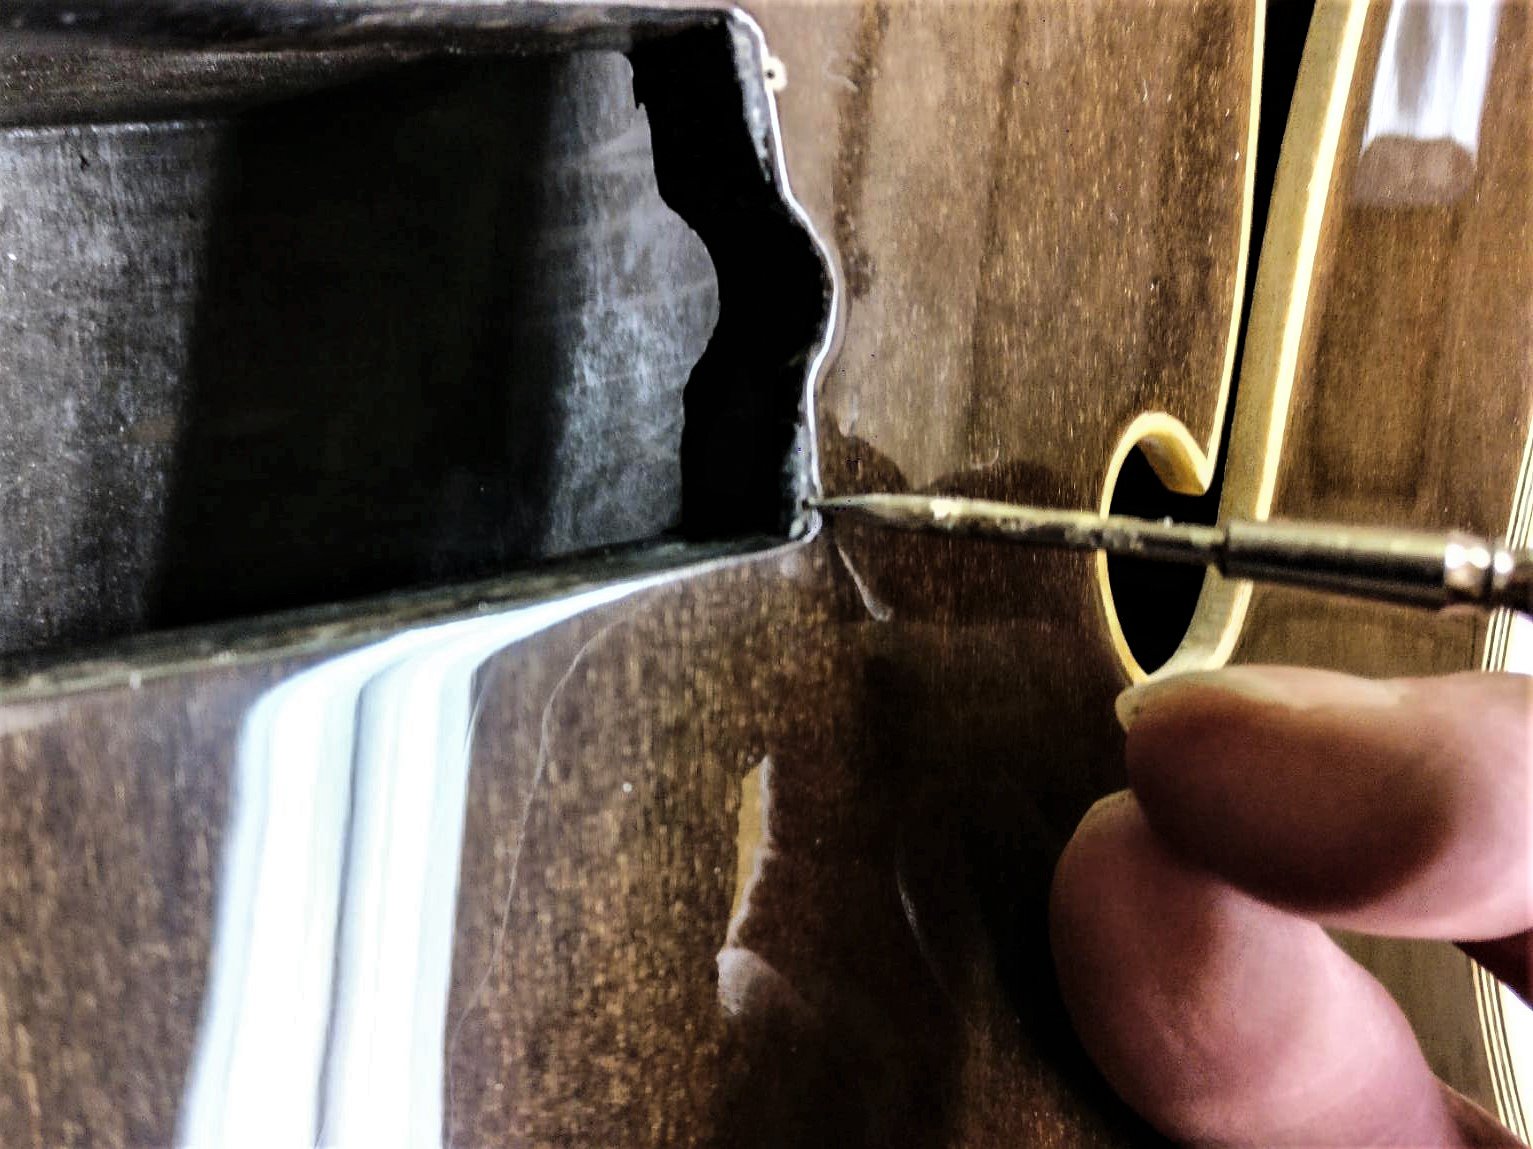 Dejawu Guitars - Hand carving a semi hollow guitar from 7500-year-old sinker wood.